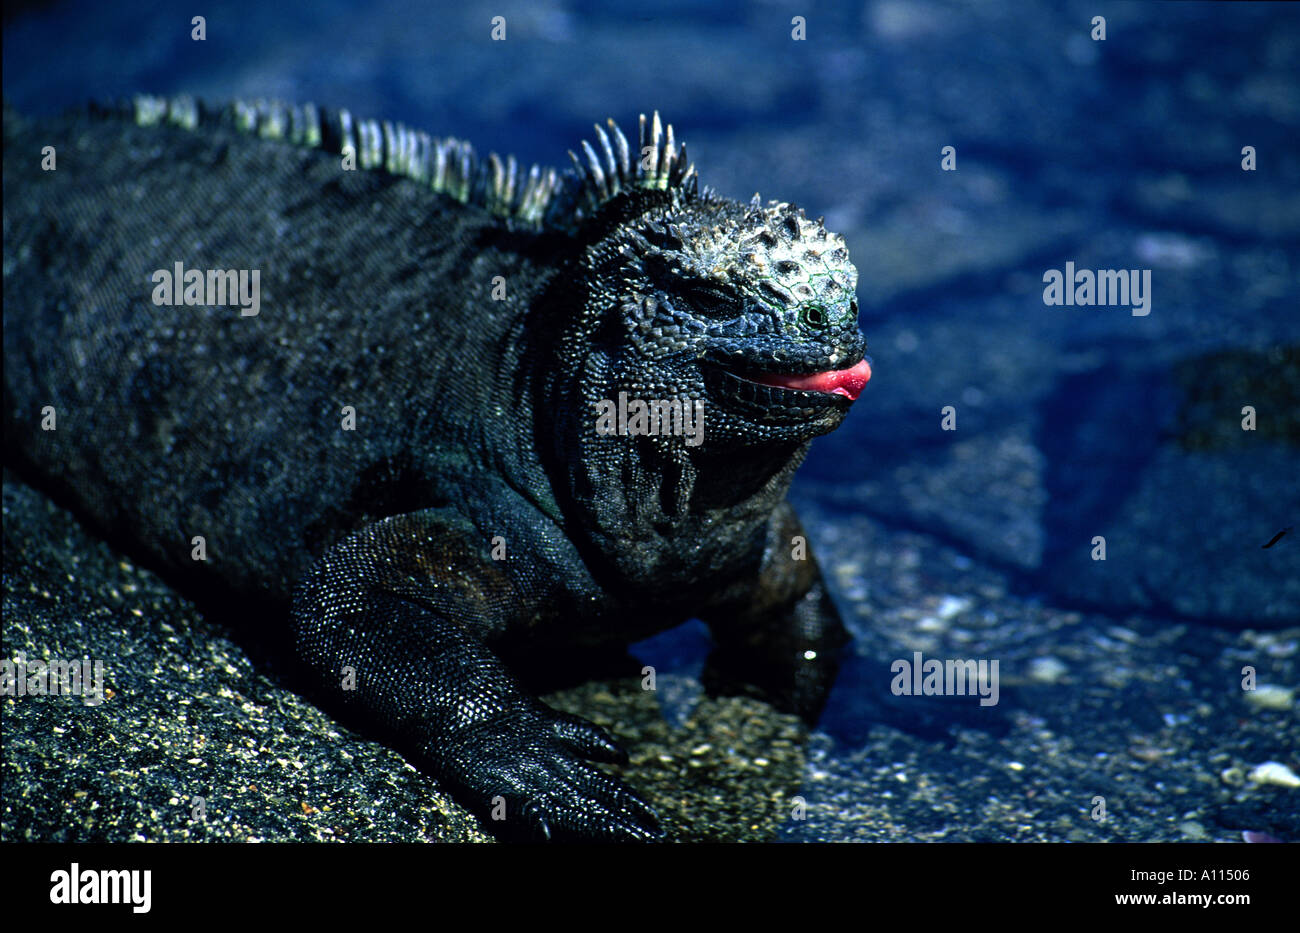 A MARINE IGUANA MUGS FOR THE CAMERA WHILE SUNNING ITSELF ON A ROCKY OUTCROPPING ON AN ISLAND IN THE GALAPAGOS Stock Photo